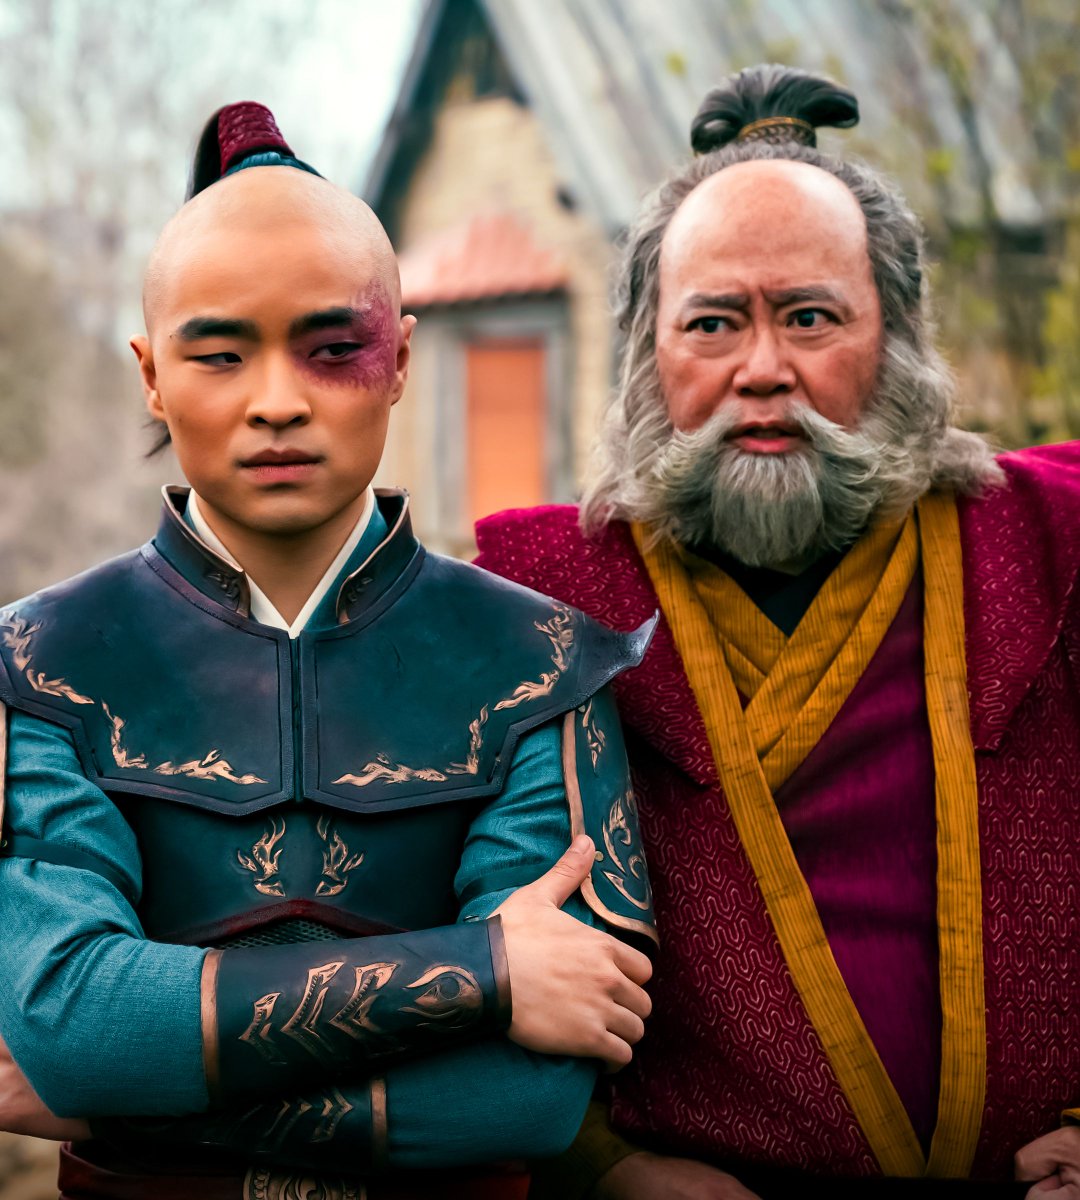 EXCLUSIVE: #AvatarNetflix actor Paul Sun-Hyung Lee has teased Iroh & Zuko's conflict in Season 2: 'It's gonna suck so hard...' Full quote: thedirect.com/article/avatar…